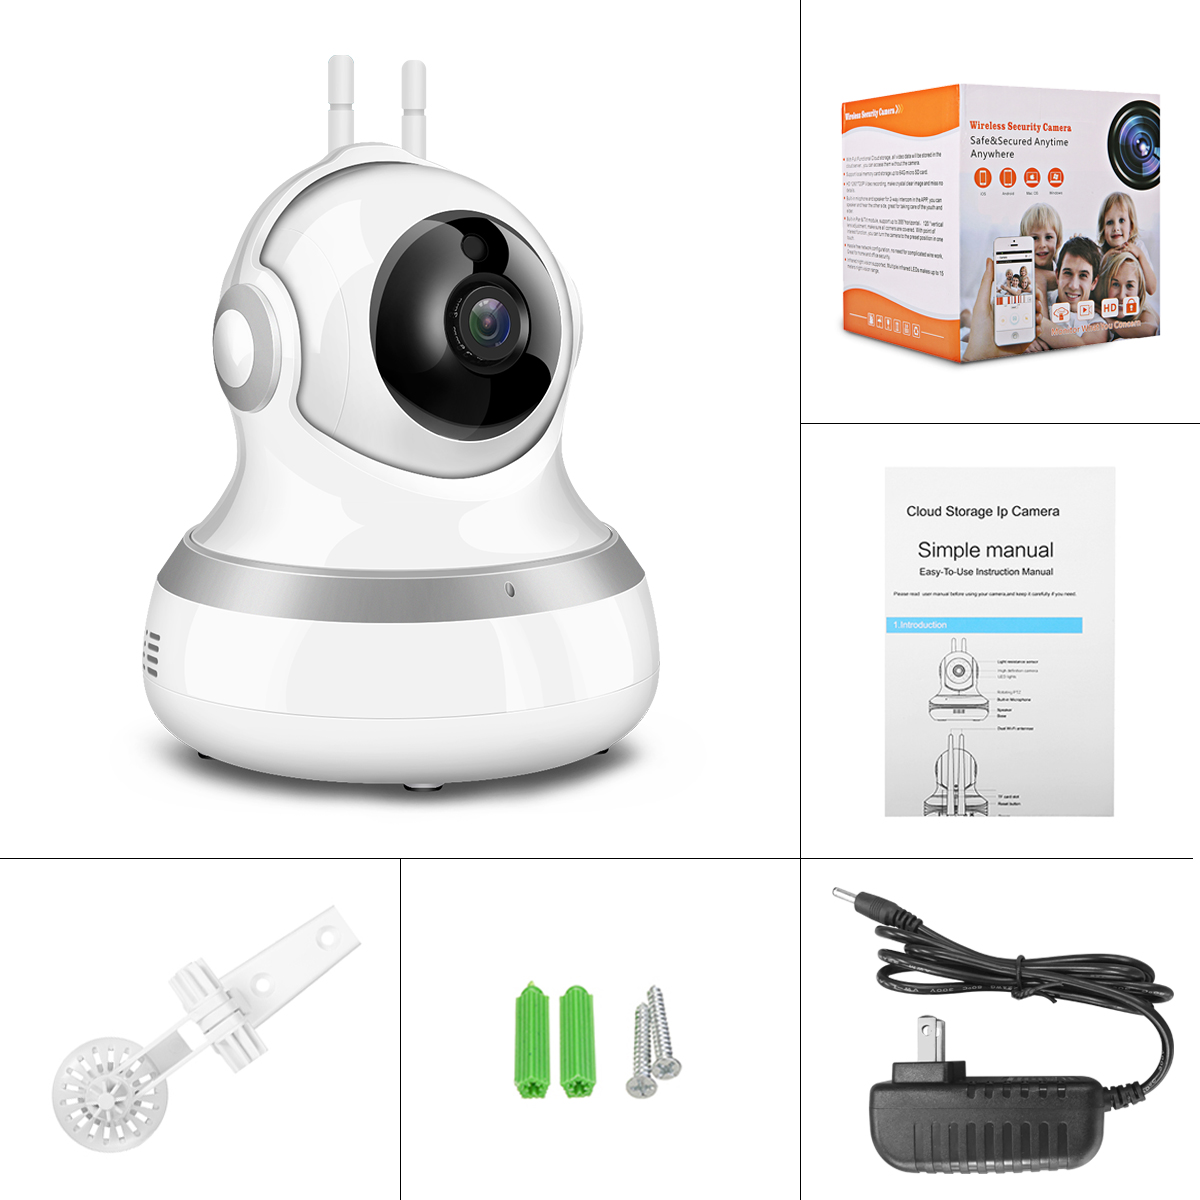 HD-1080P-Wireless-WiFi-IP-P2P-Motion-Detection-IR-Night-Vision-Home-Baby-Security-Surveillance-Netwo-1975804-1